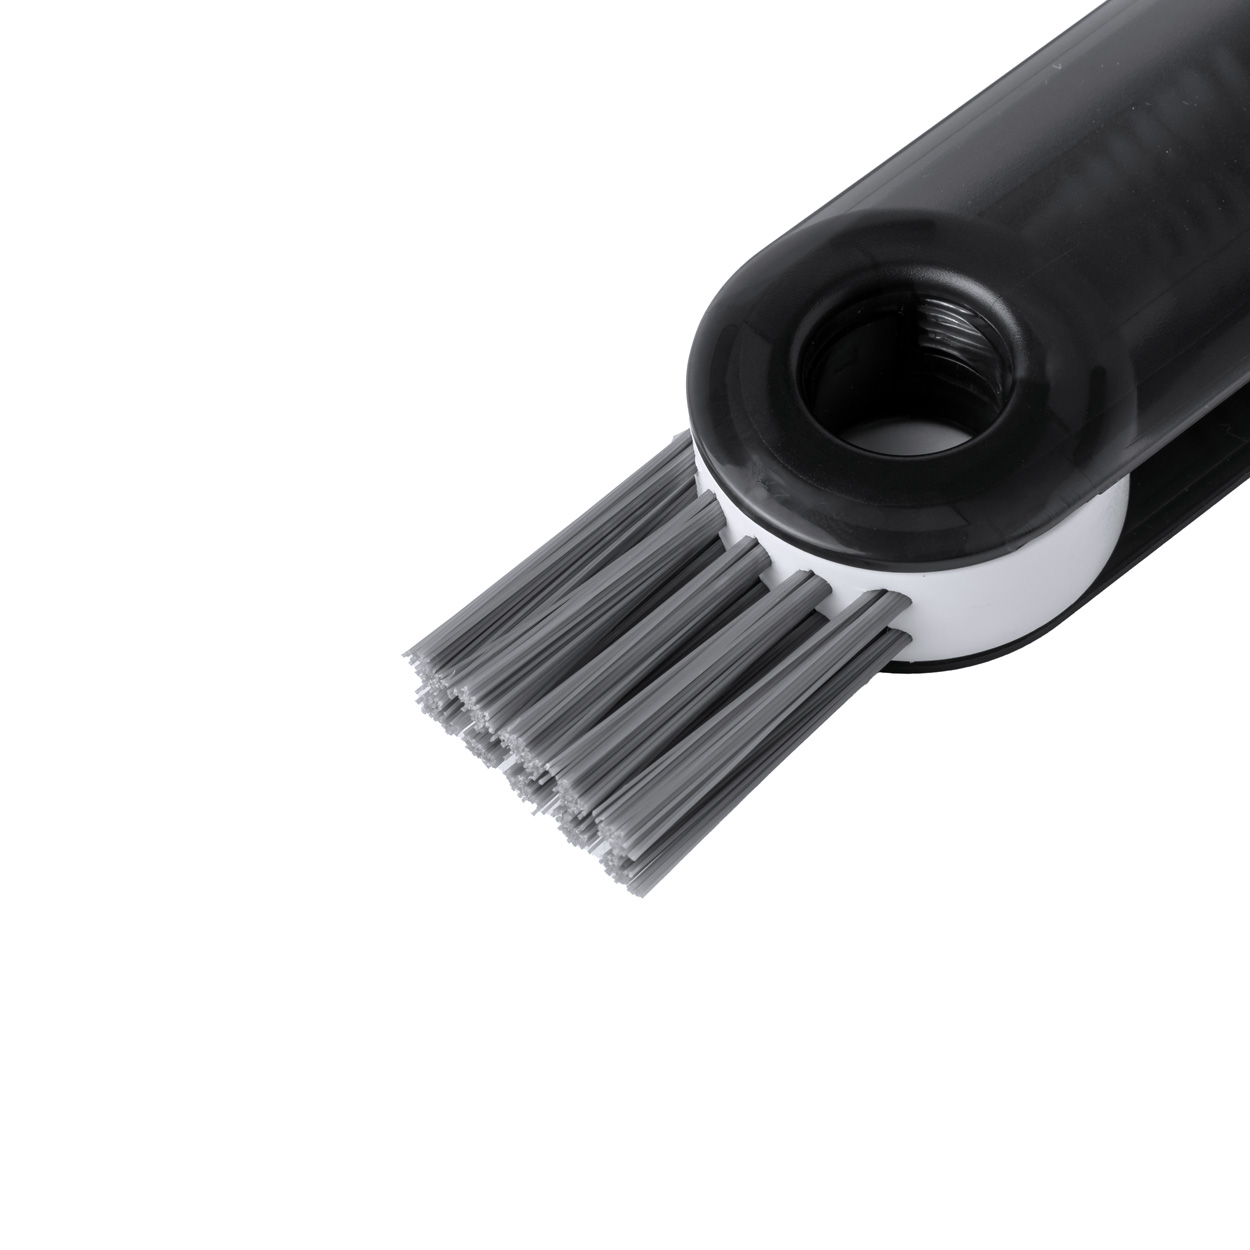 Promo  Grimg cleaning brush